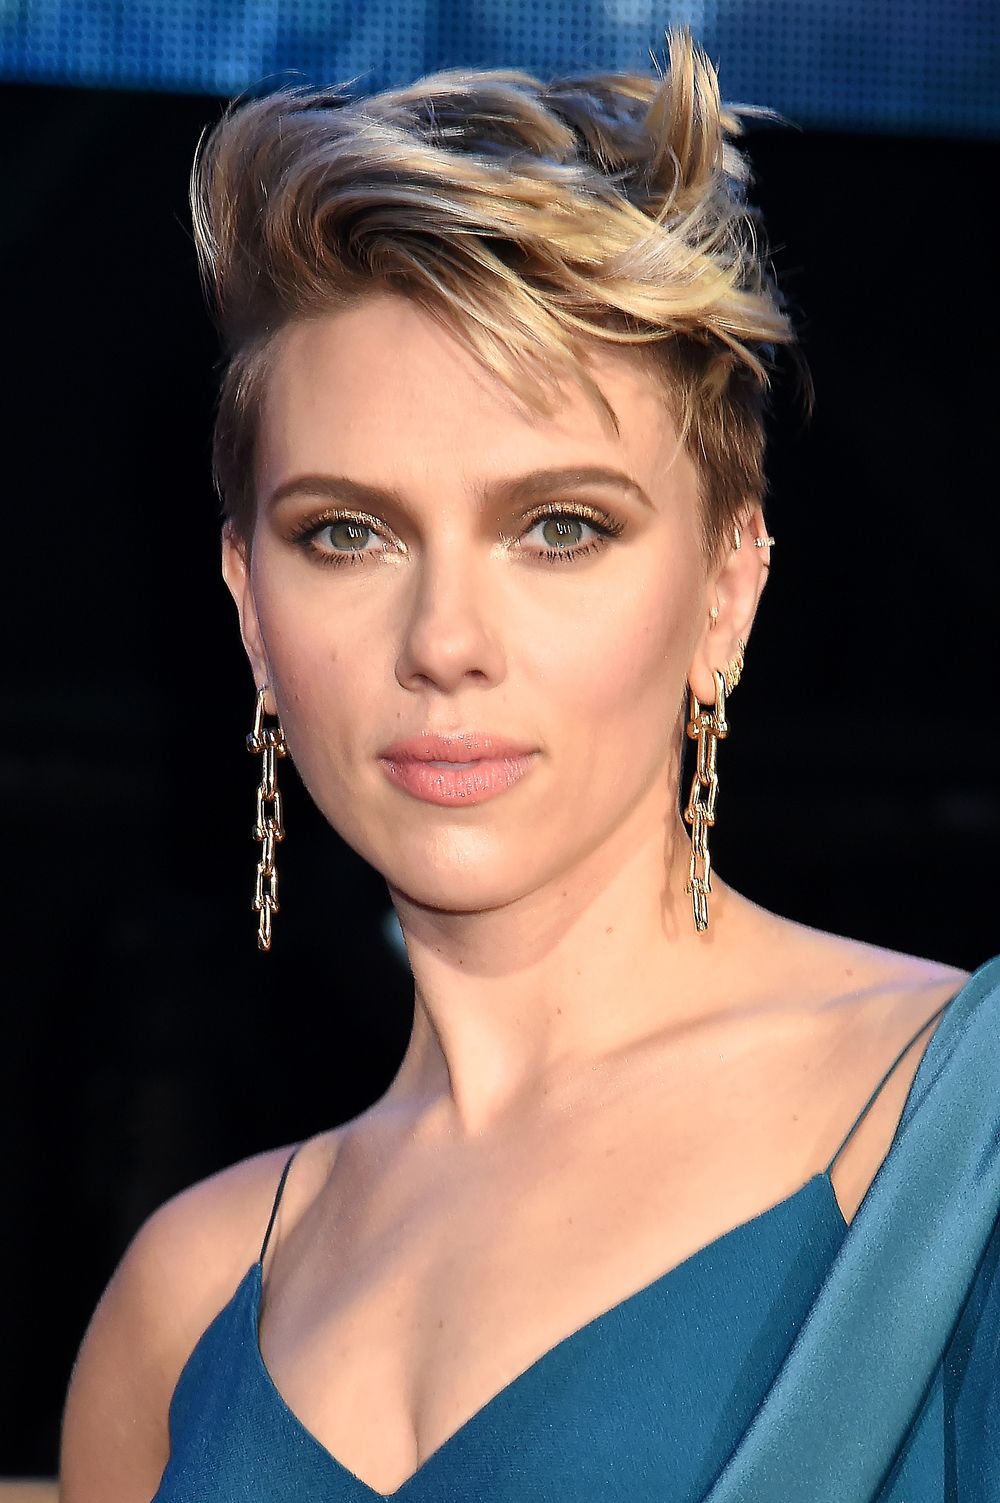 19 Best Pixie Cuts of 2019  Celebrity Pixie Hairstyle Ideas  Allure